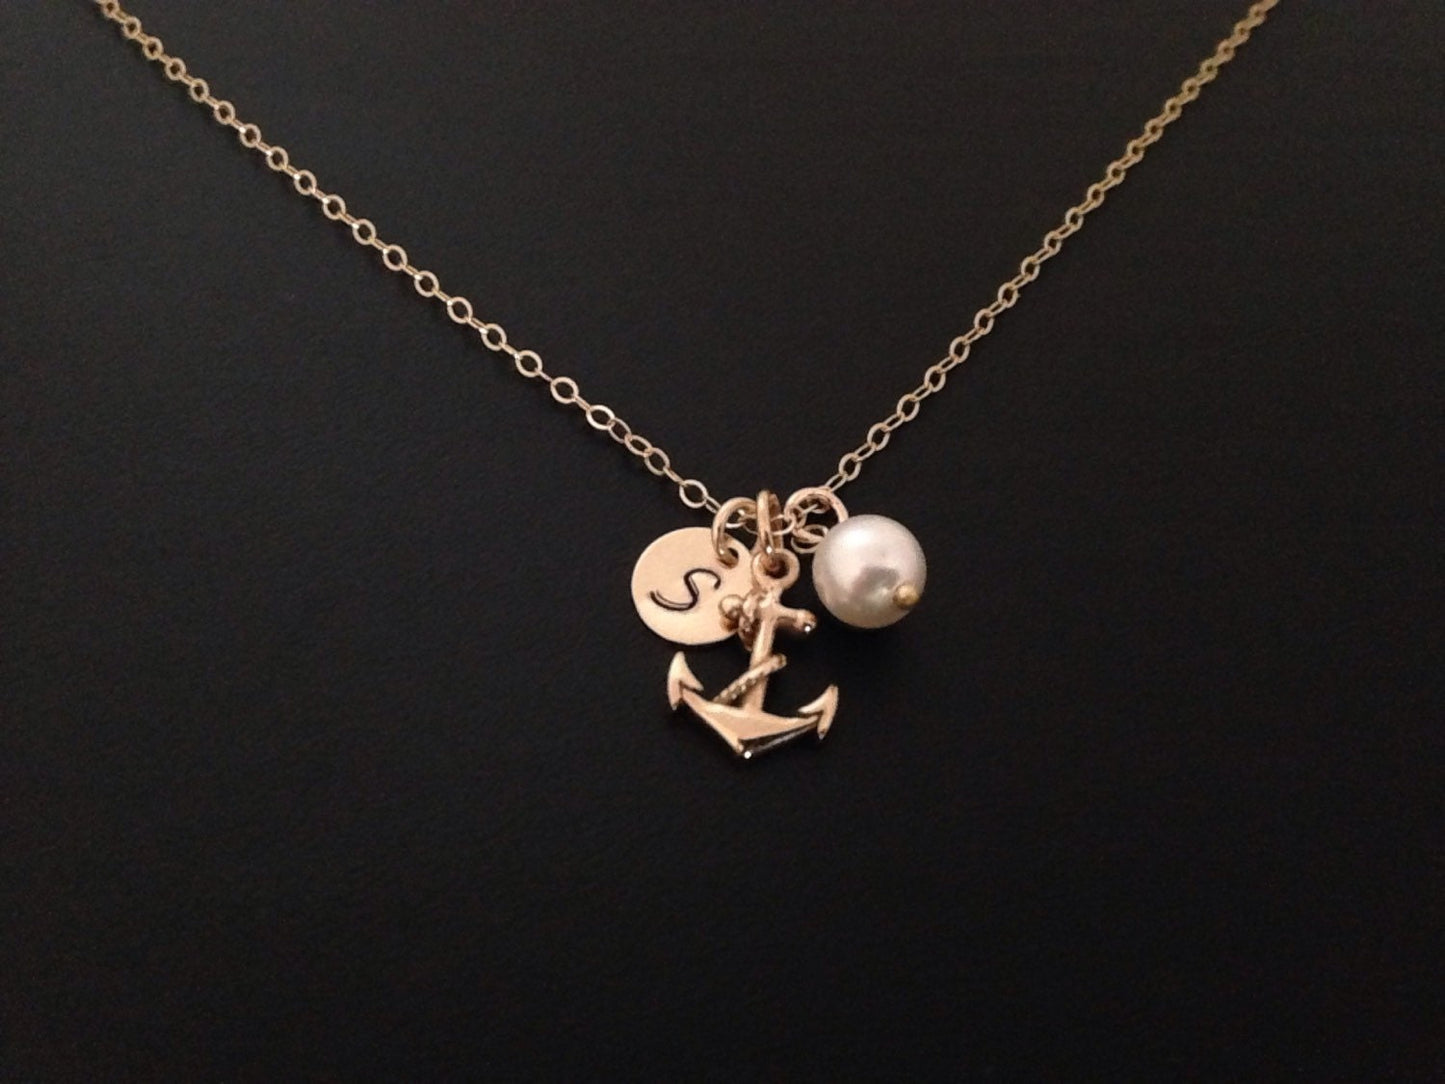 Personalized Gold OR Sterling Silver Anchor Necklace, Marine wife, Marine mom, Sailor jewelry, Initialed Disc,Navy wife, Navy mom jewelry